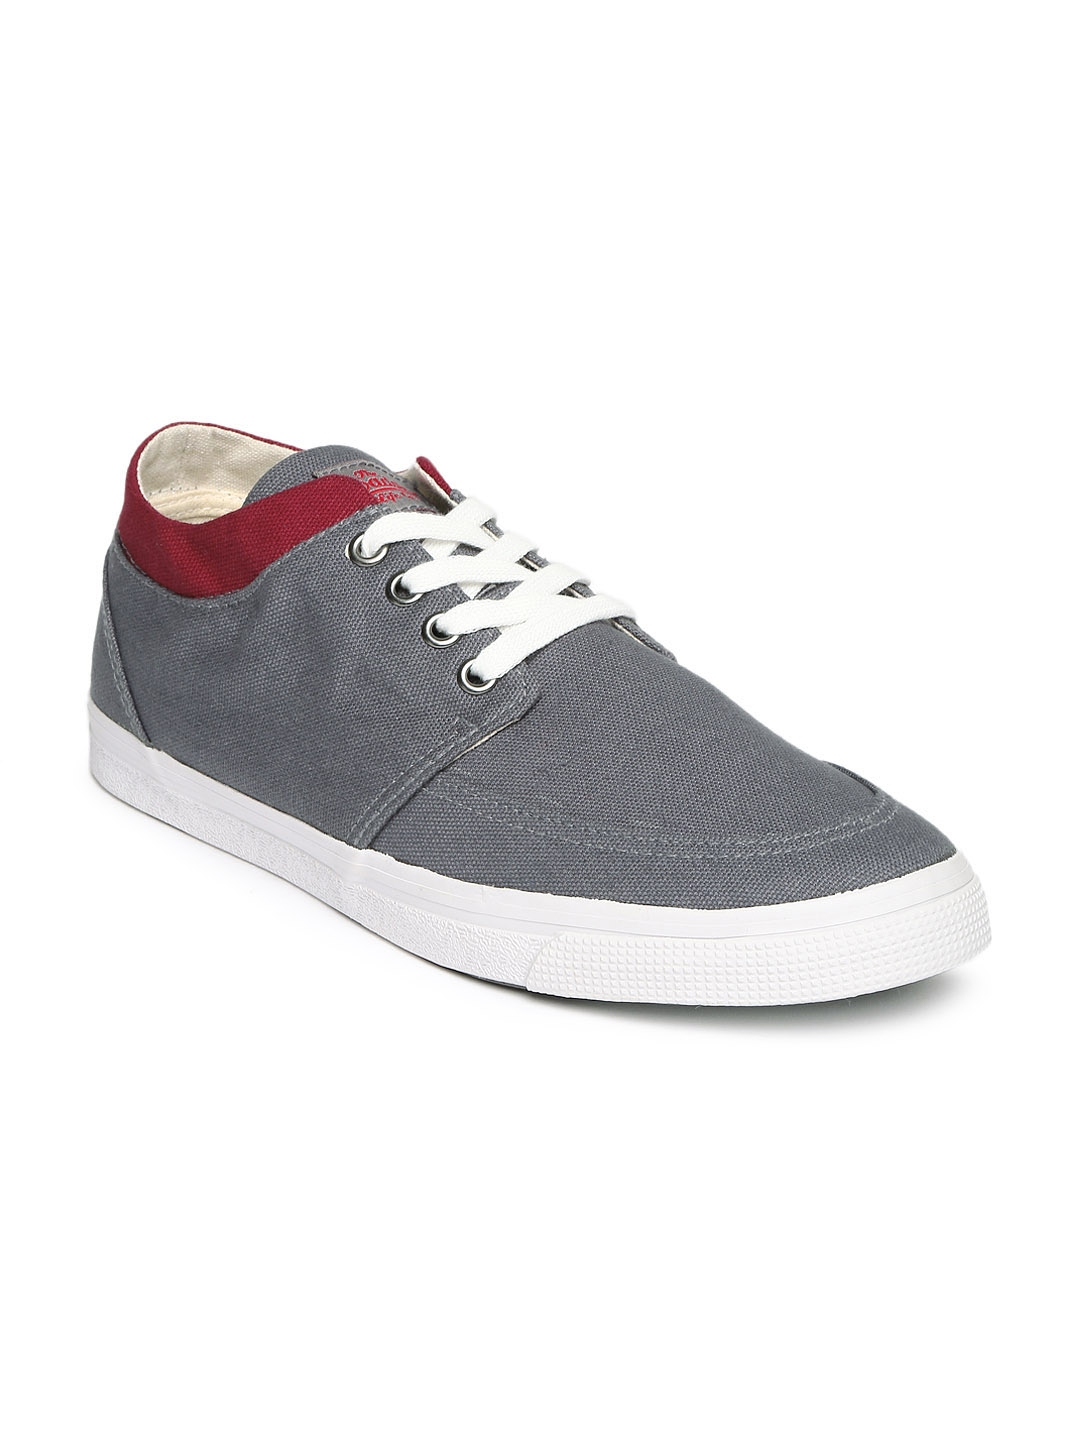 Buy Roadster Men Grey Casual Shoes Casual Shoes For Men 851549 Myntra 6895